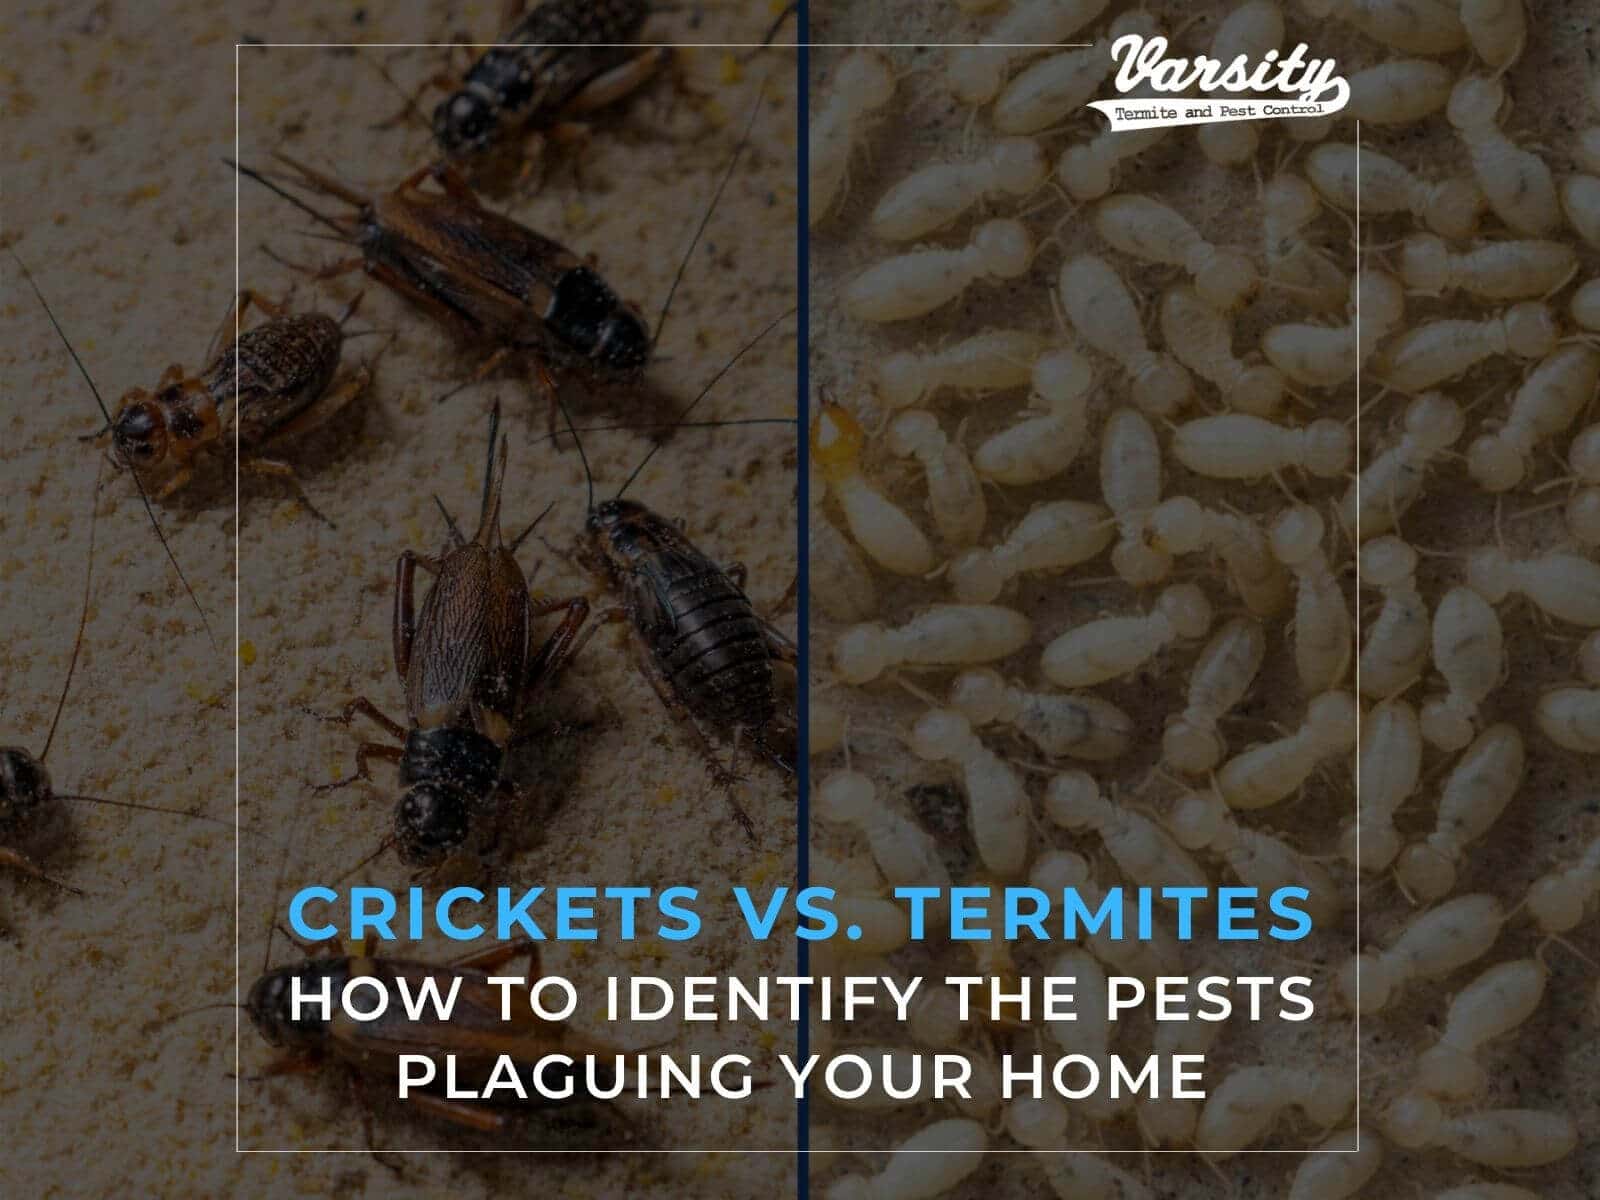 Crickets vs. Termites: How to Identify the Pests Plaguing Your Home